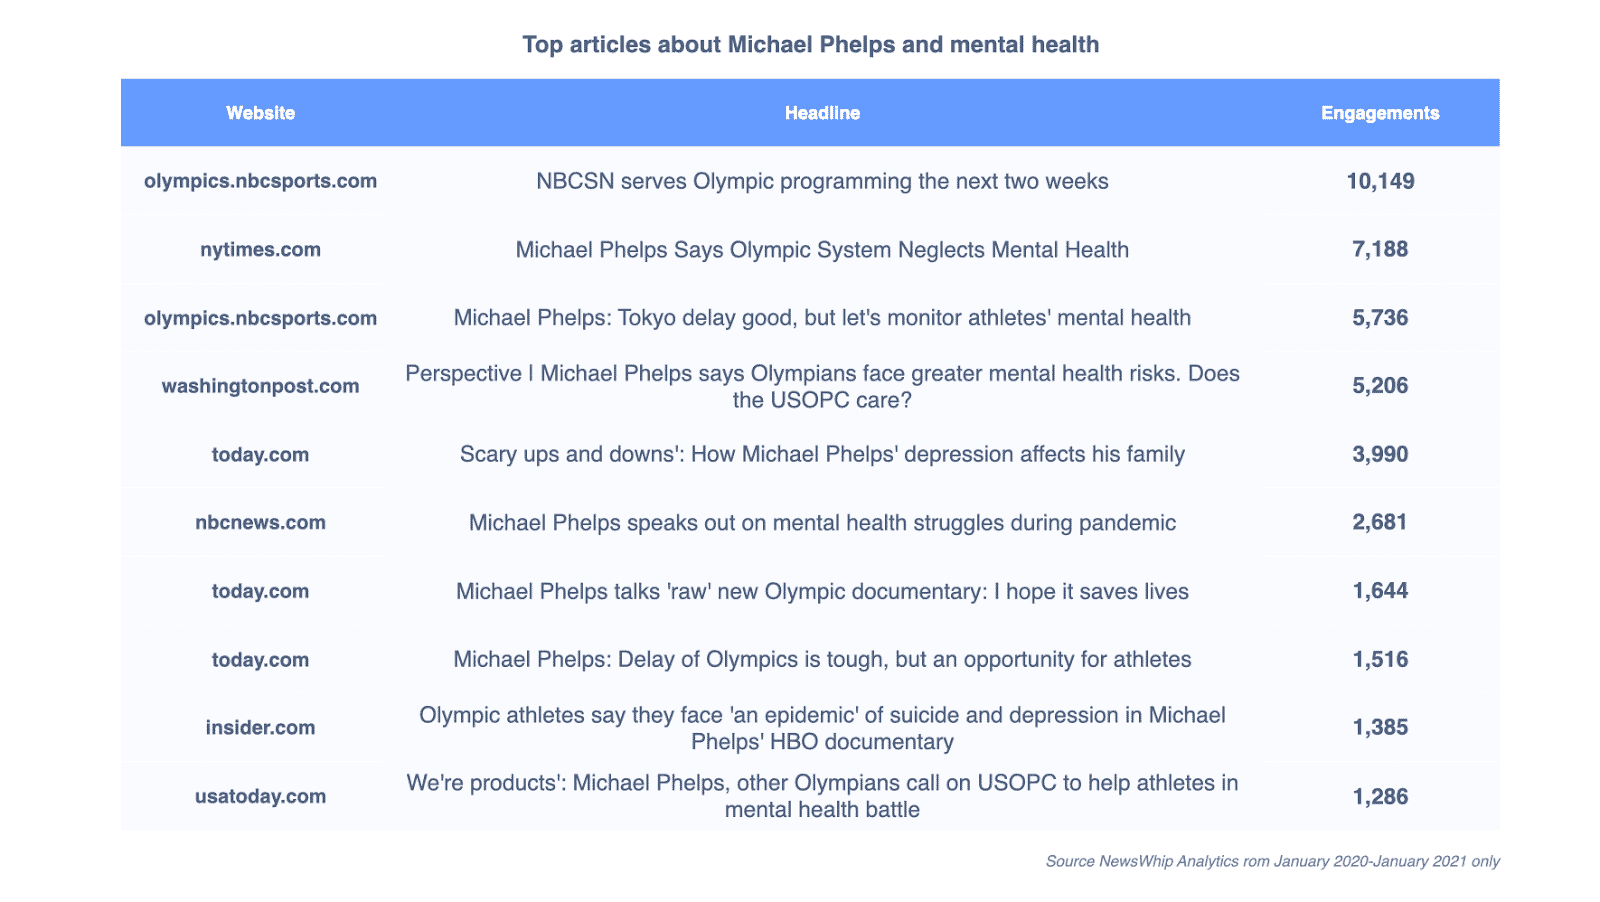 Chart showing the top stories about Michael Phelps and mental health in the past year